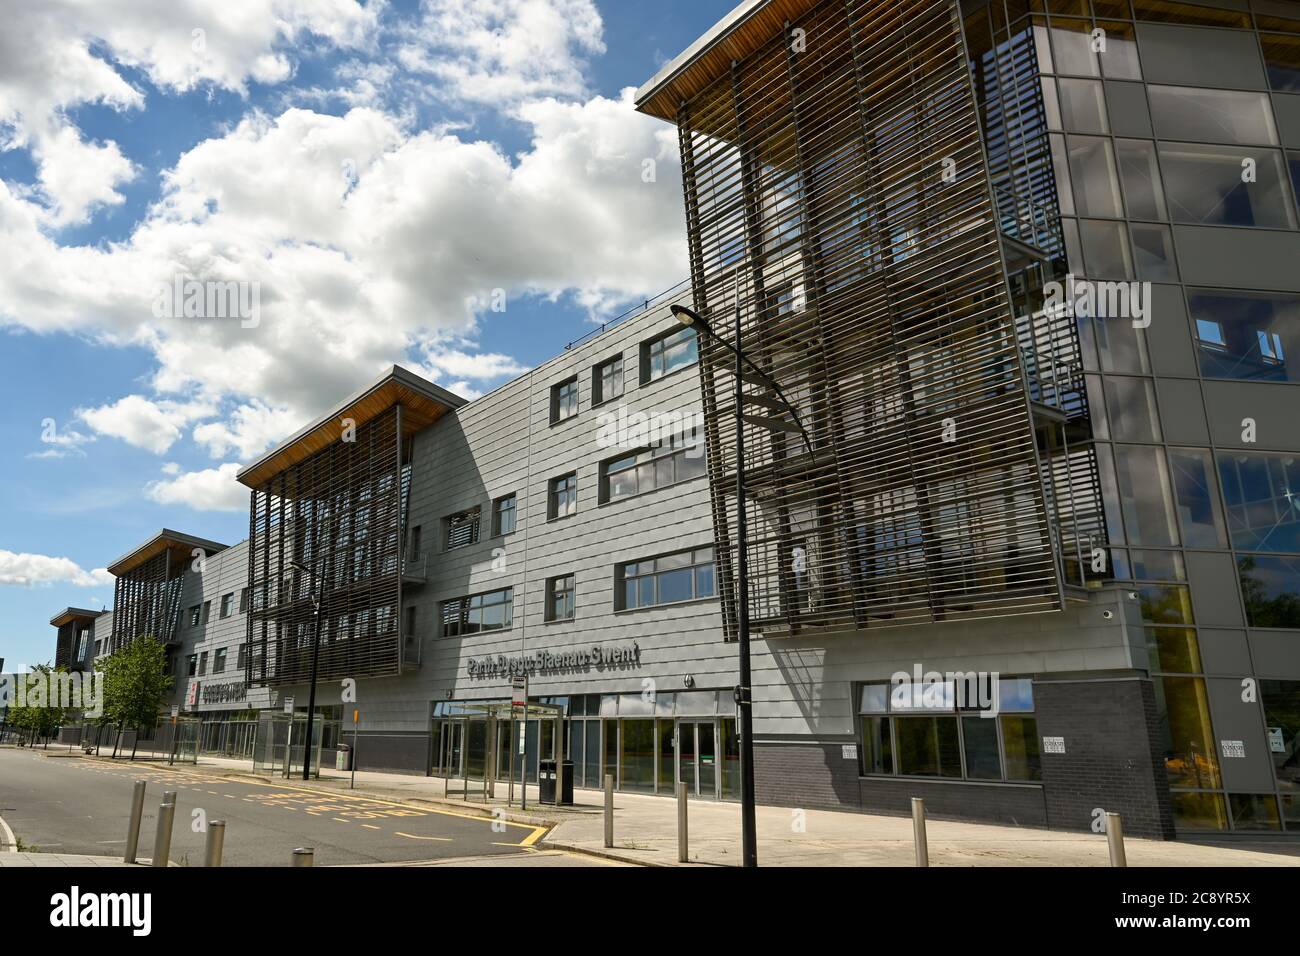 Ebbw Vale, Wales - July 2020: Exterior front view of the Ebbw Vale building of the further education college 'Coleg Gwent'. Stock Photo